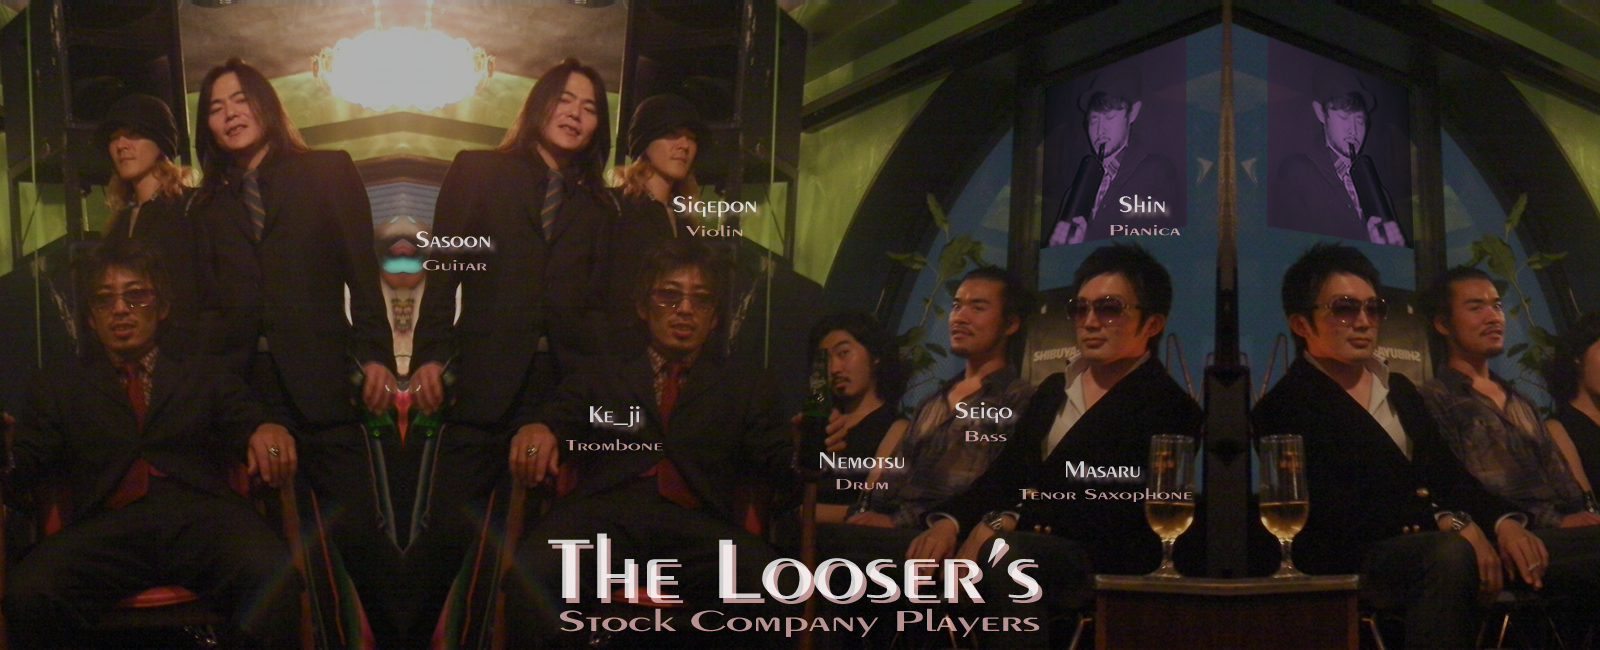 THE LOOSERS